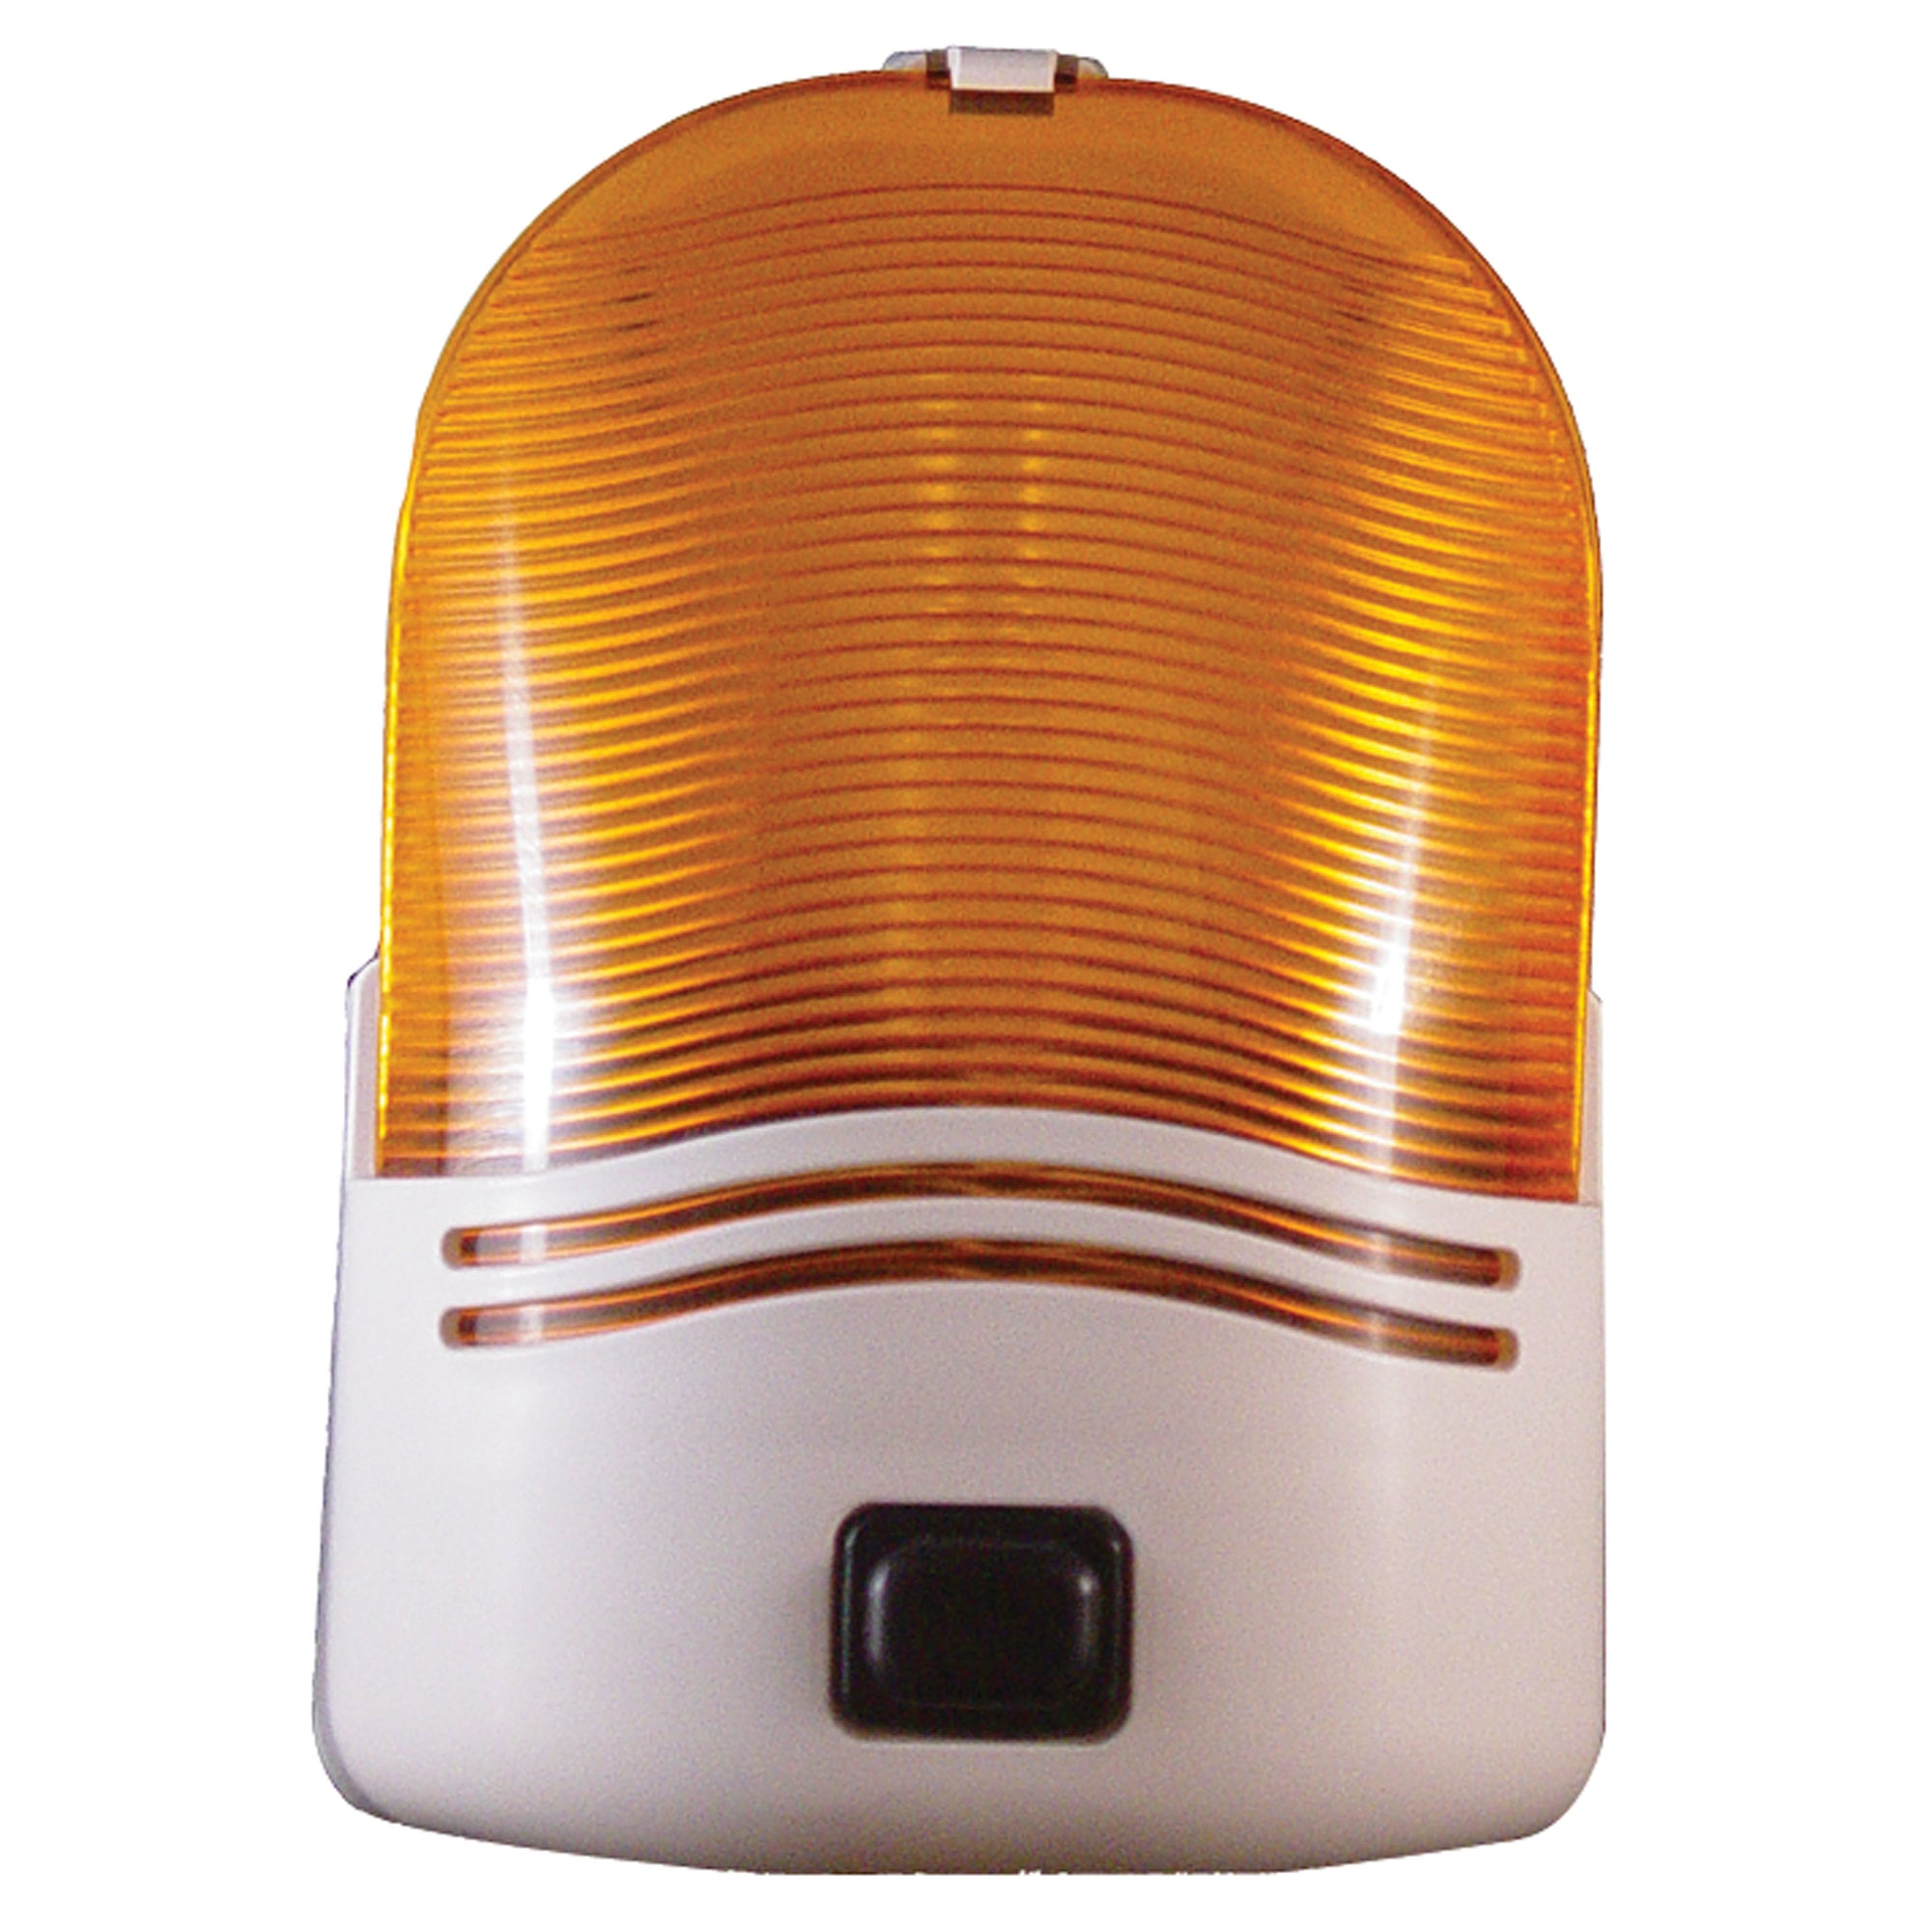 Fasteners Unlimited 007-30SAP Omega Porch Light with Amber Lens